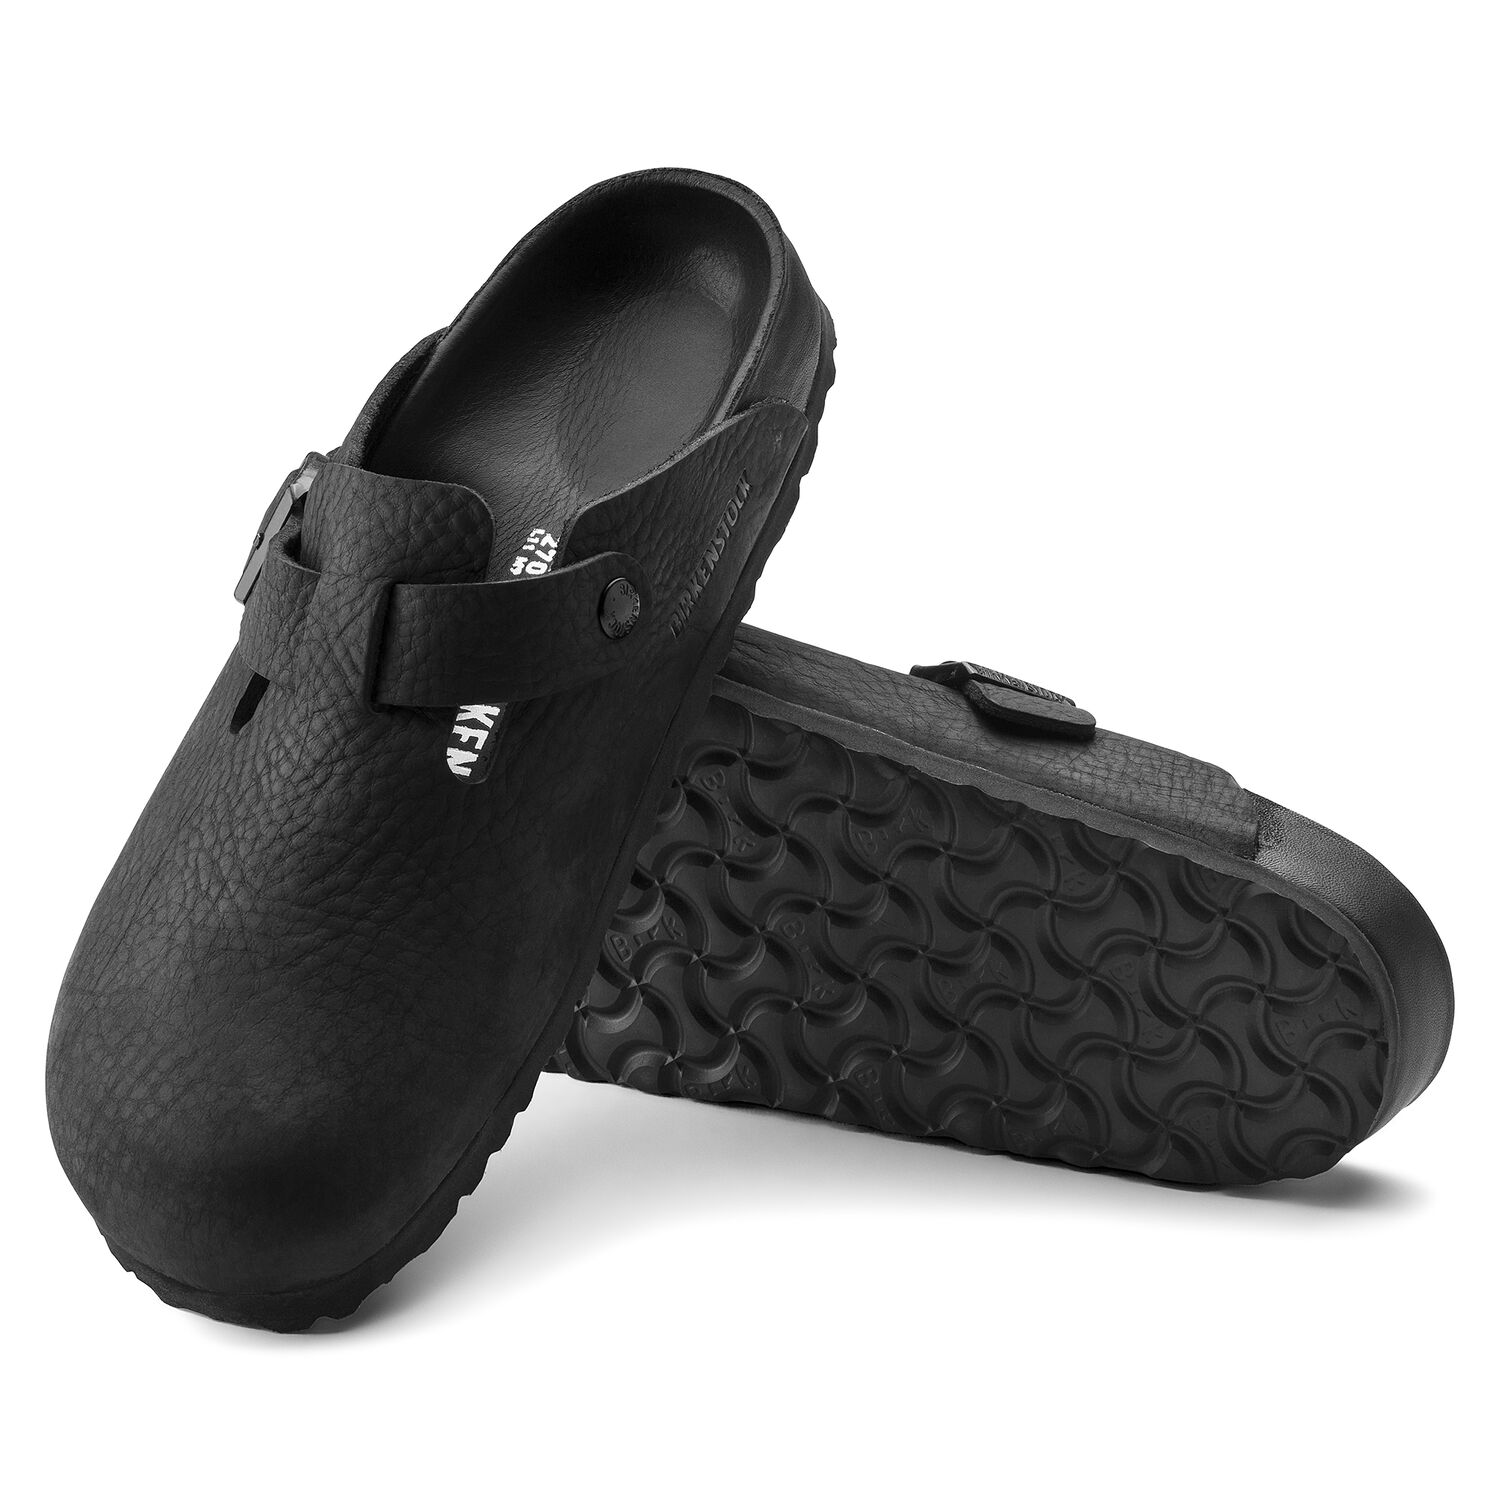 Boston Classic Footbed : Black Exquisite Nubuck - 39 Only